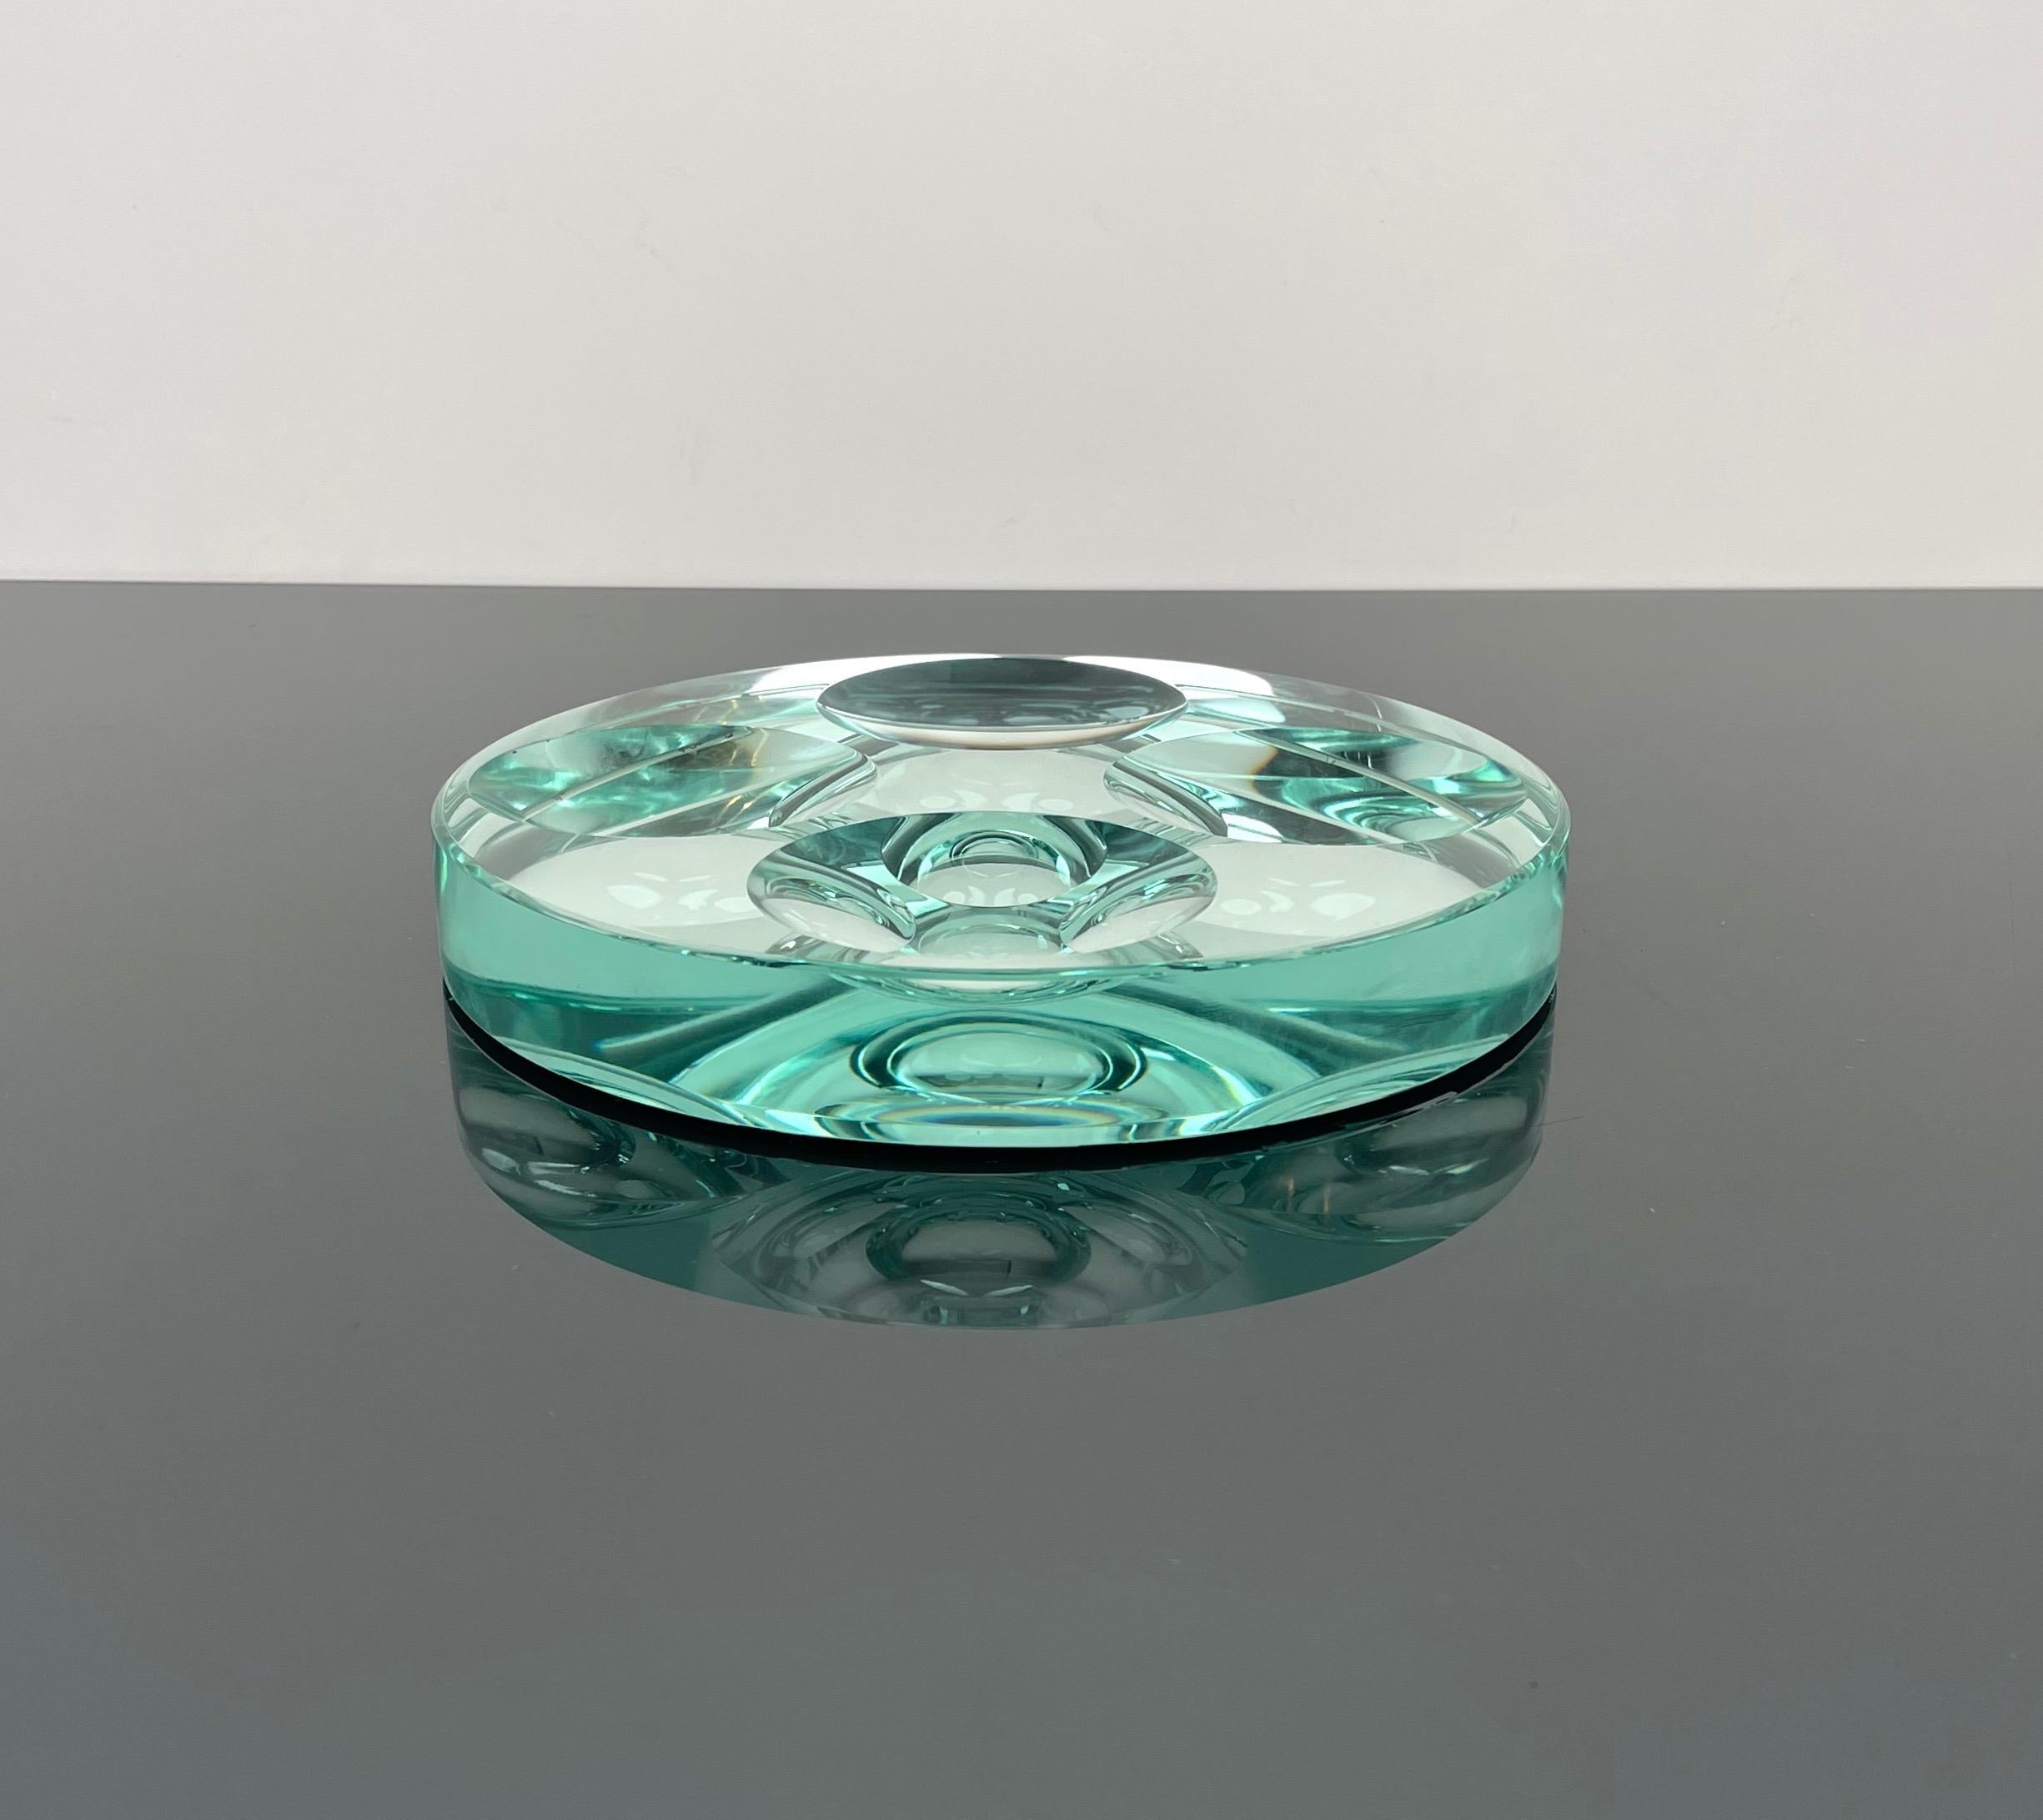 Rare round bowl or ashtray in green crystal glass and mirrored underside with four concave circle by Fontana Arte.

Made in Italy in the 1960s.